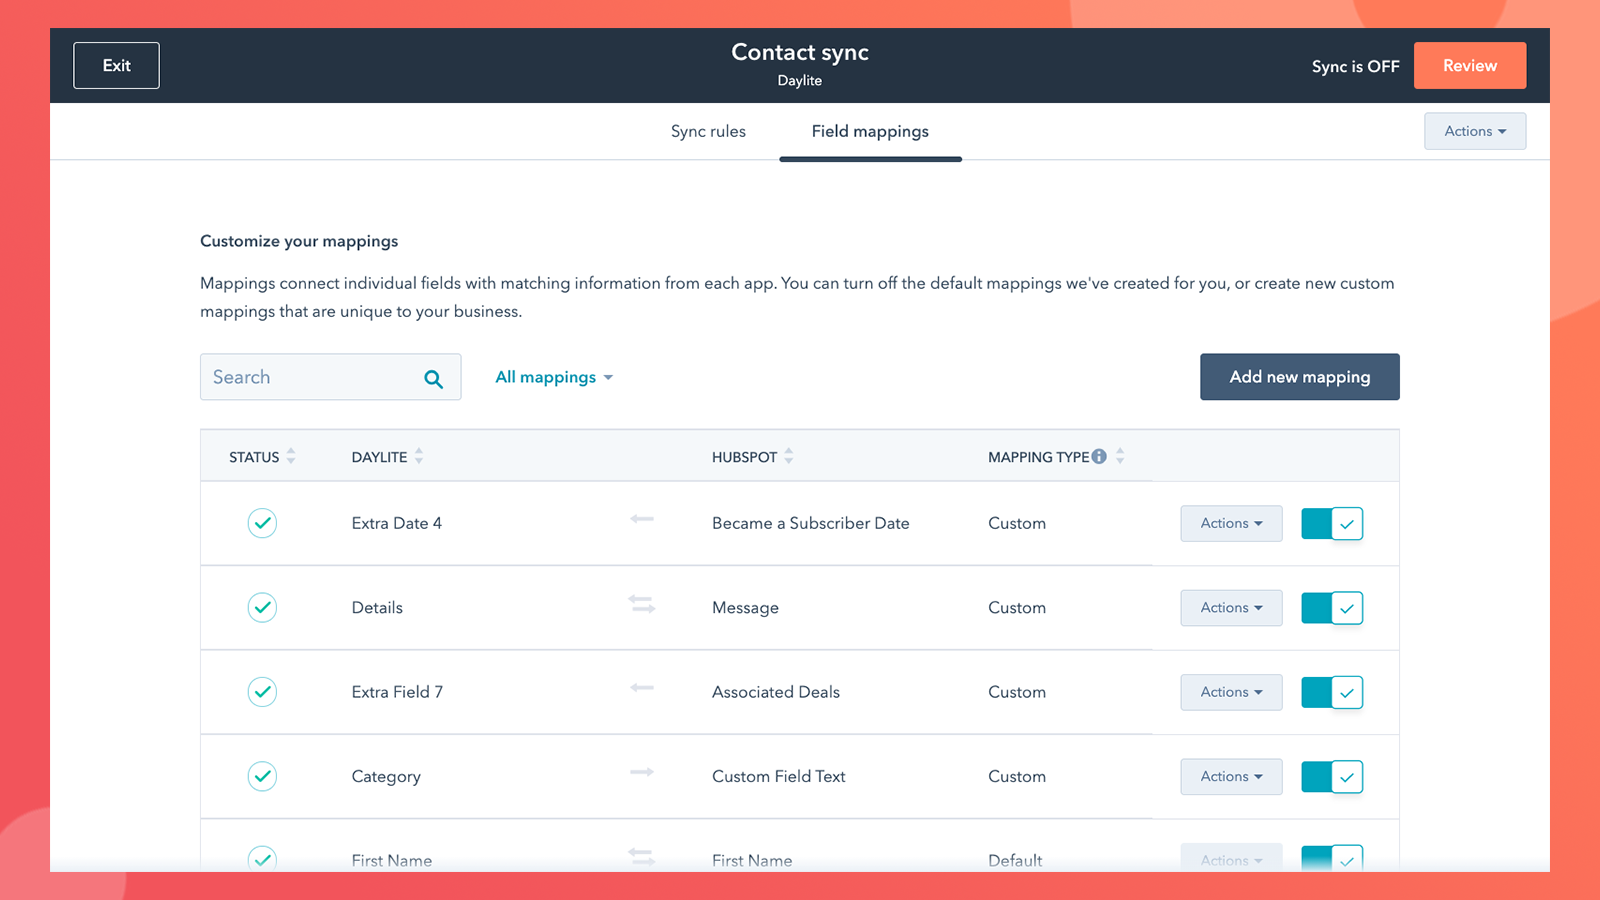 Screenshot of contact syncing with the new Daylite and HubSpot integration.